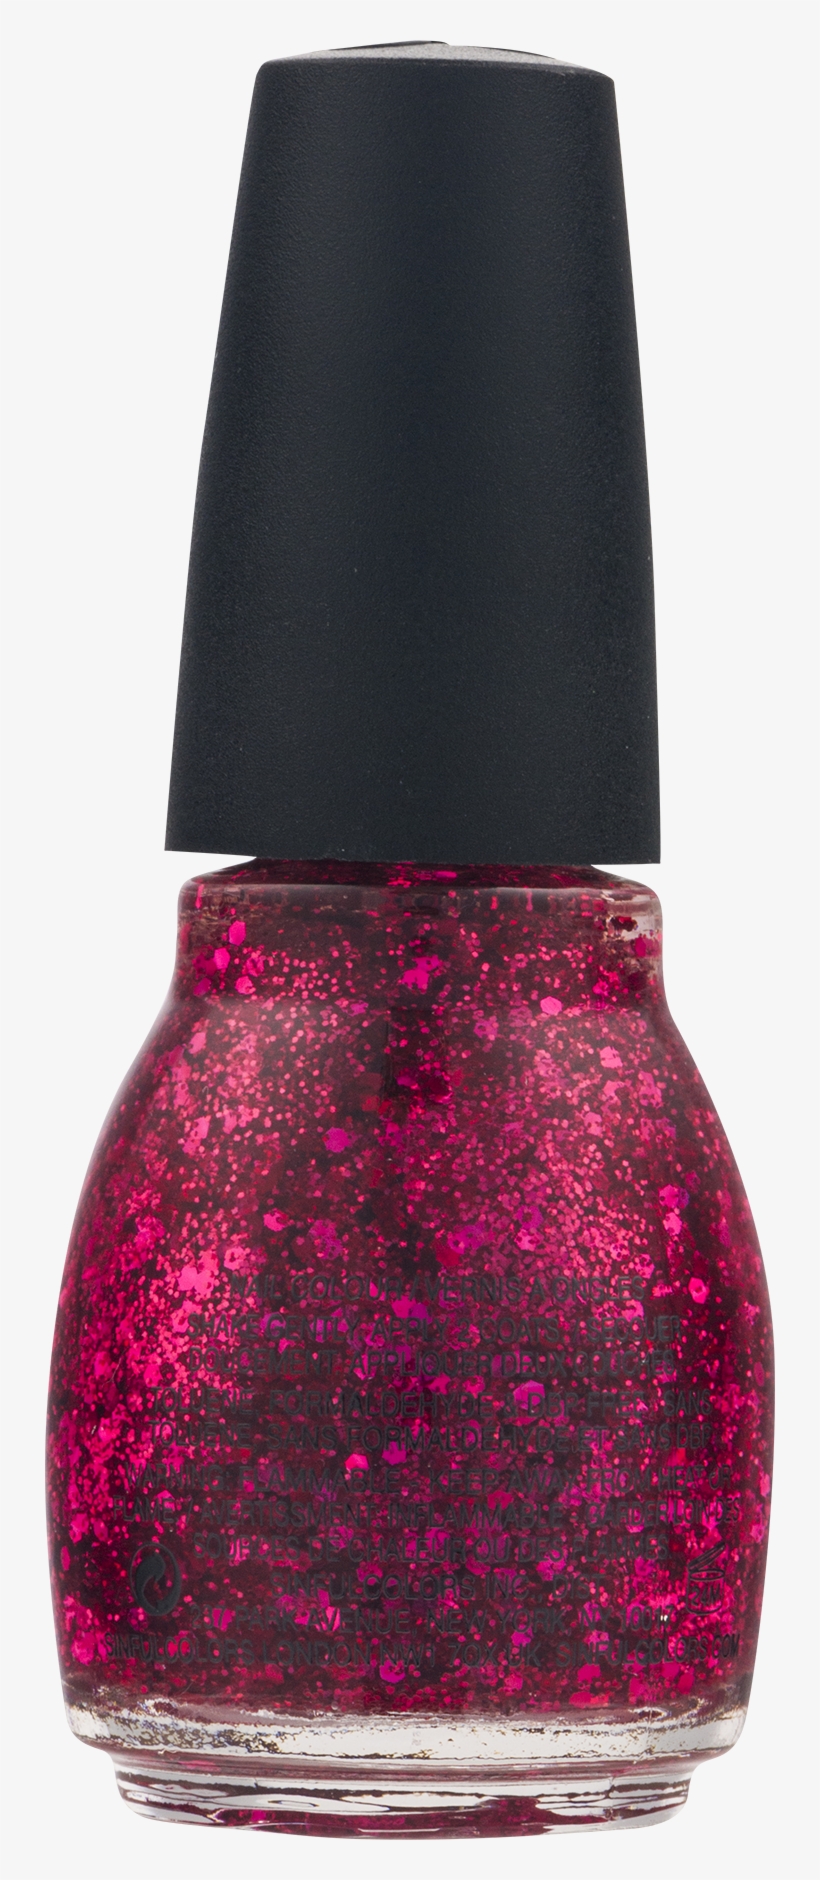 Sinful Colors - Professional Nail Polish #1381 Decadent - Free Transparent  PNG Download - PNGkey